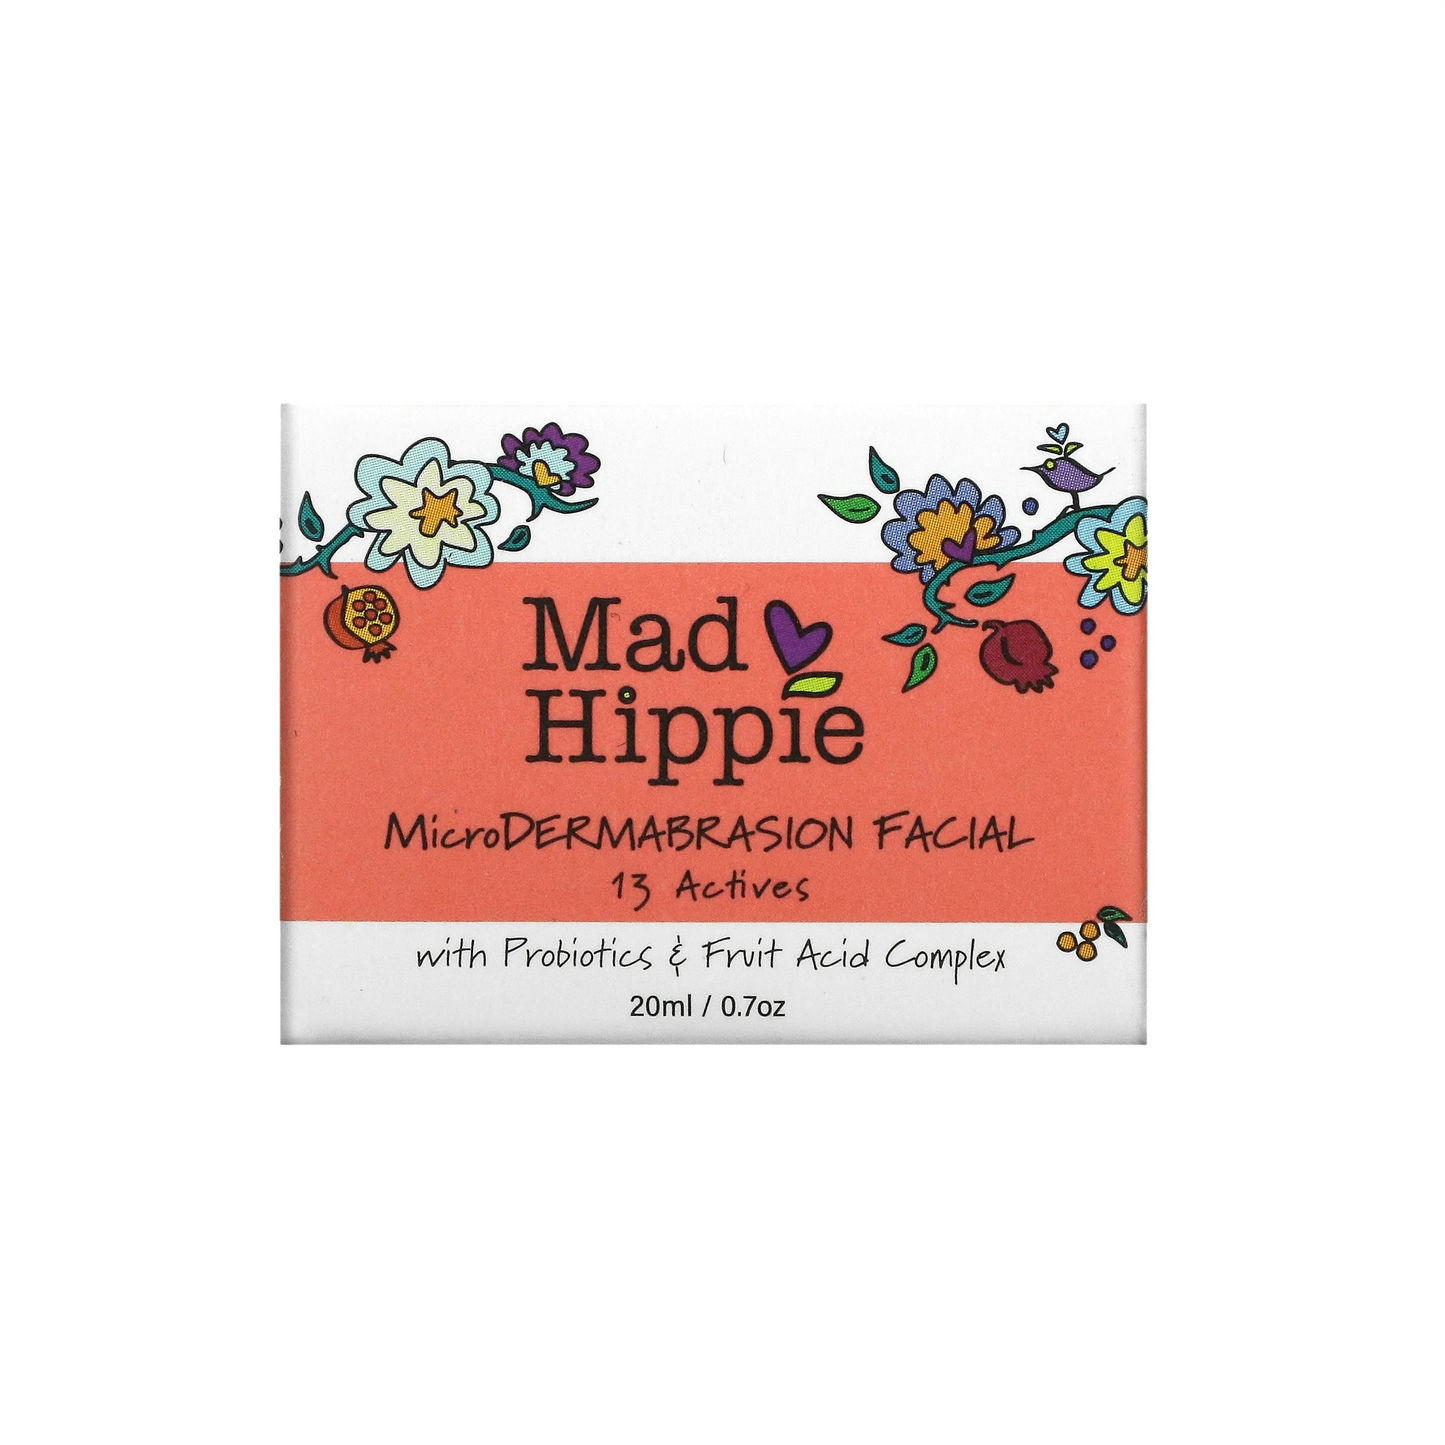 Mad Hippie Microdermabrasion Facial Deluxe 20ml